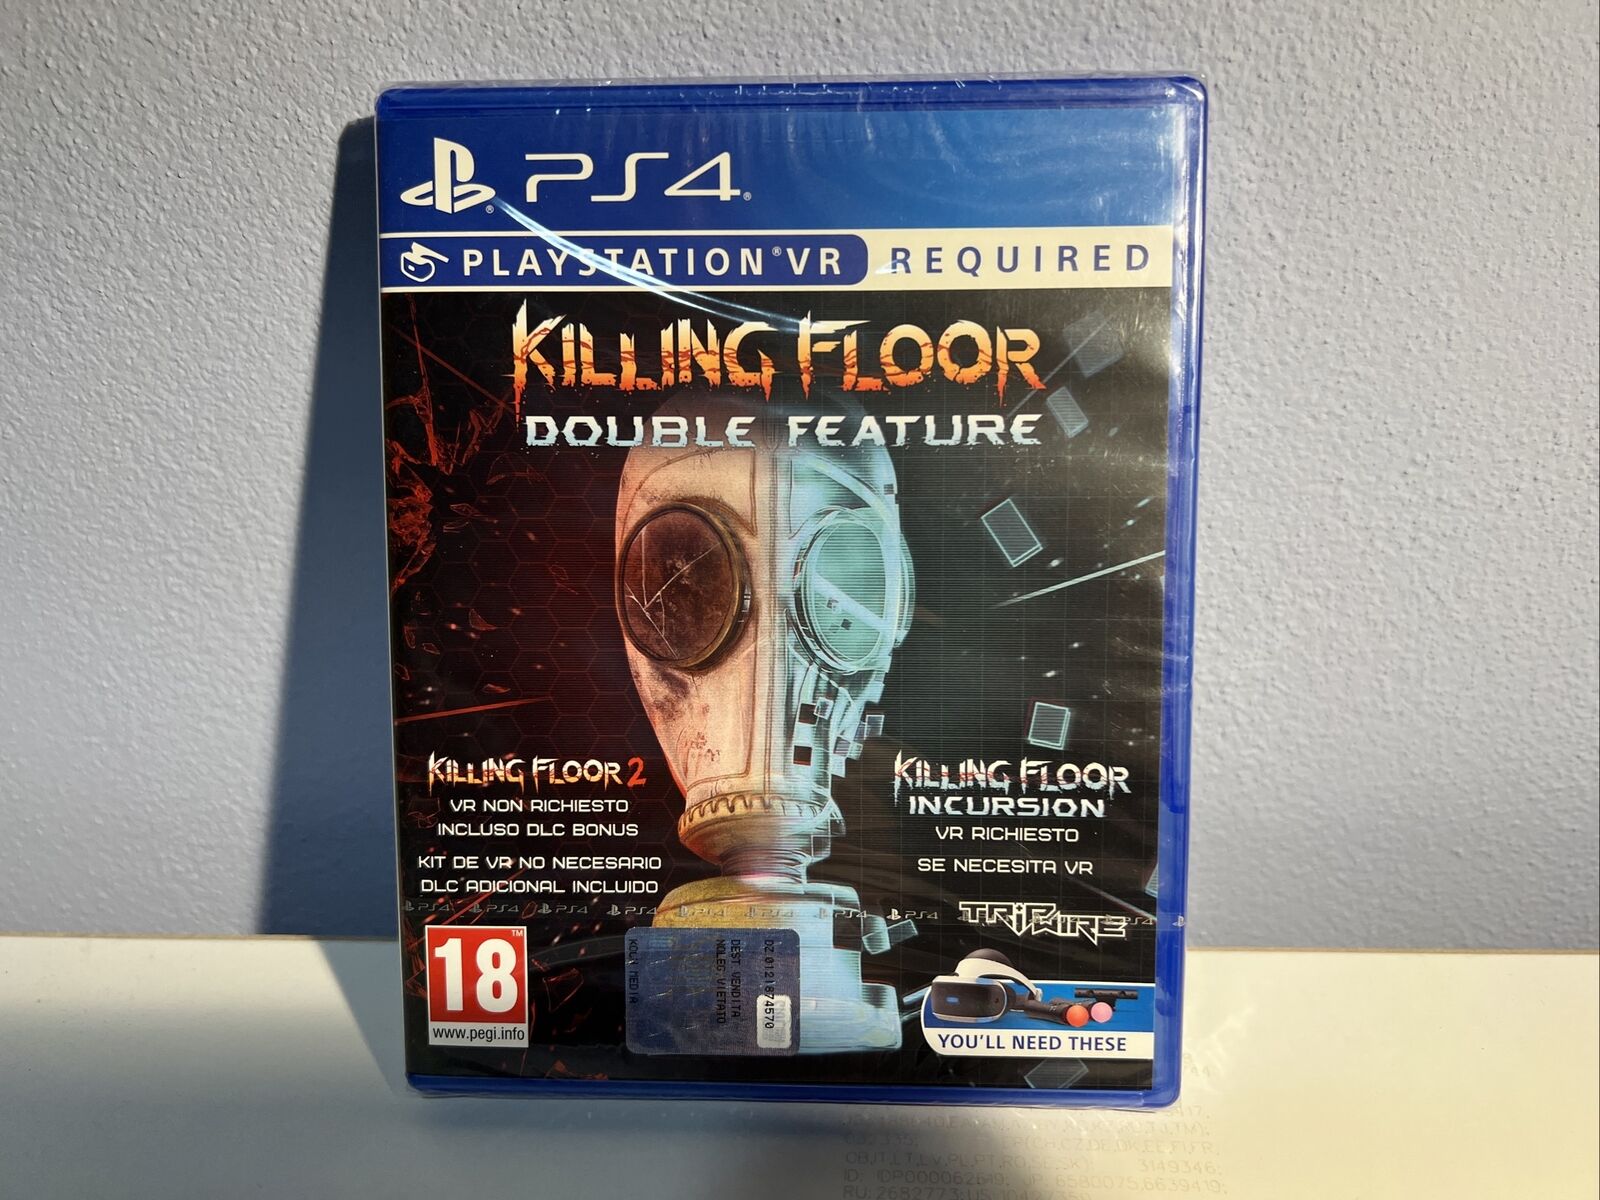 Playstation-4-Ps4-Videogioco-Killing-Floor-Double-Feature-Vr-Required-133930663932